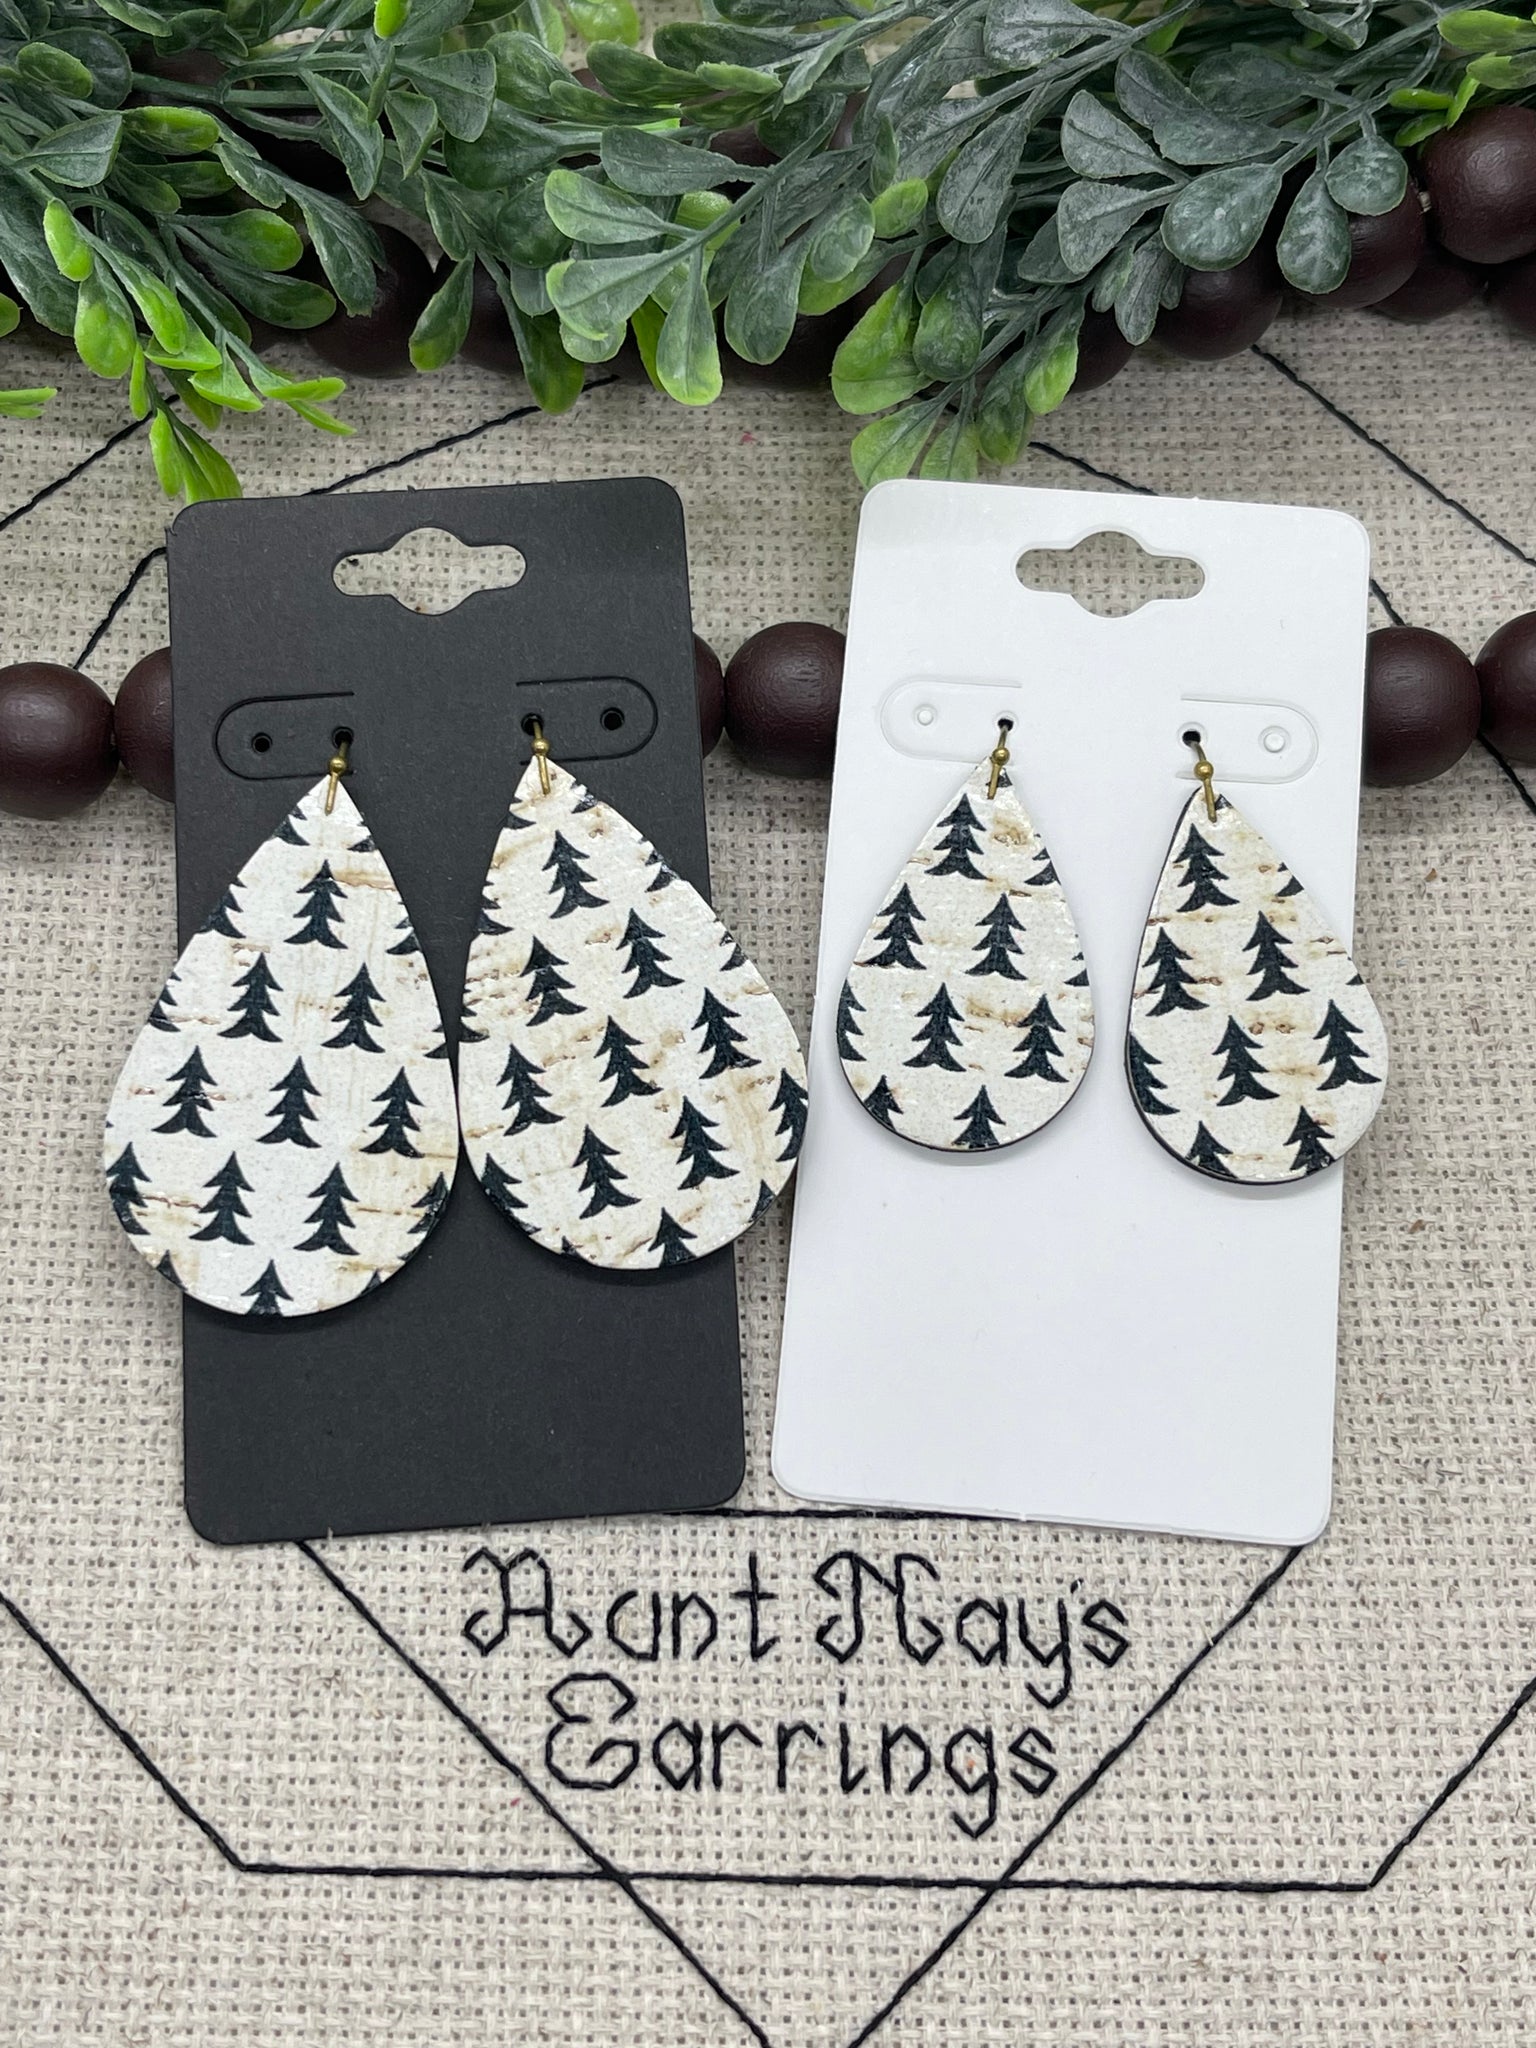 White Cork with Black Christmas Trees Print on Leather Earrings